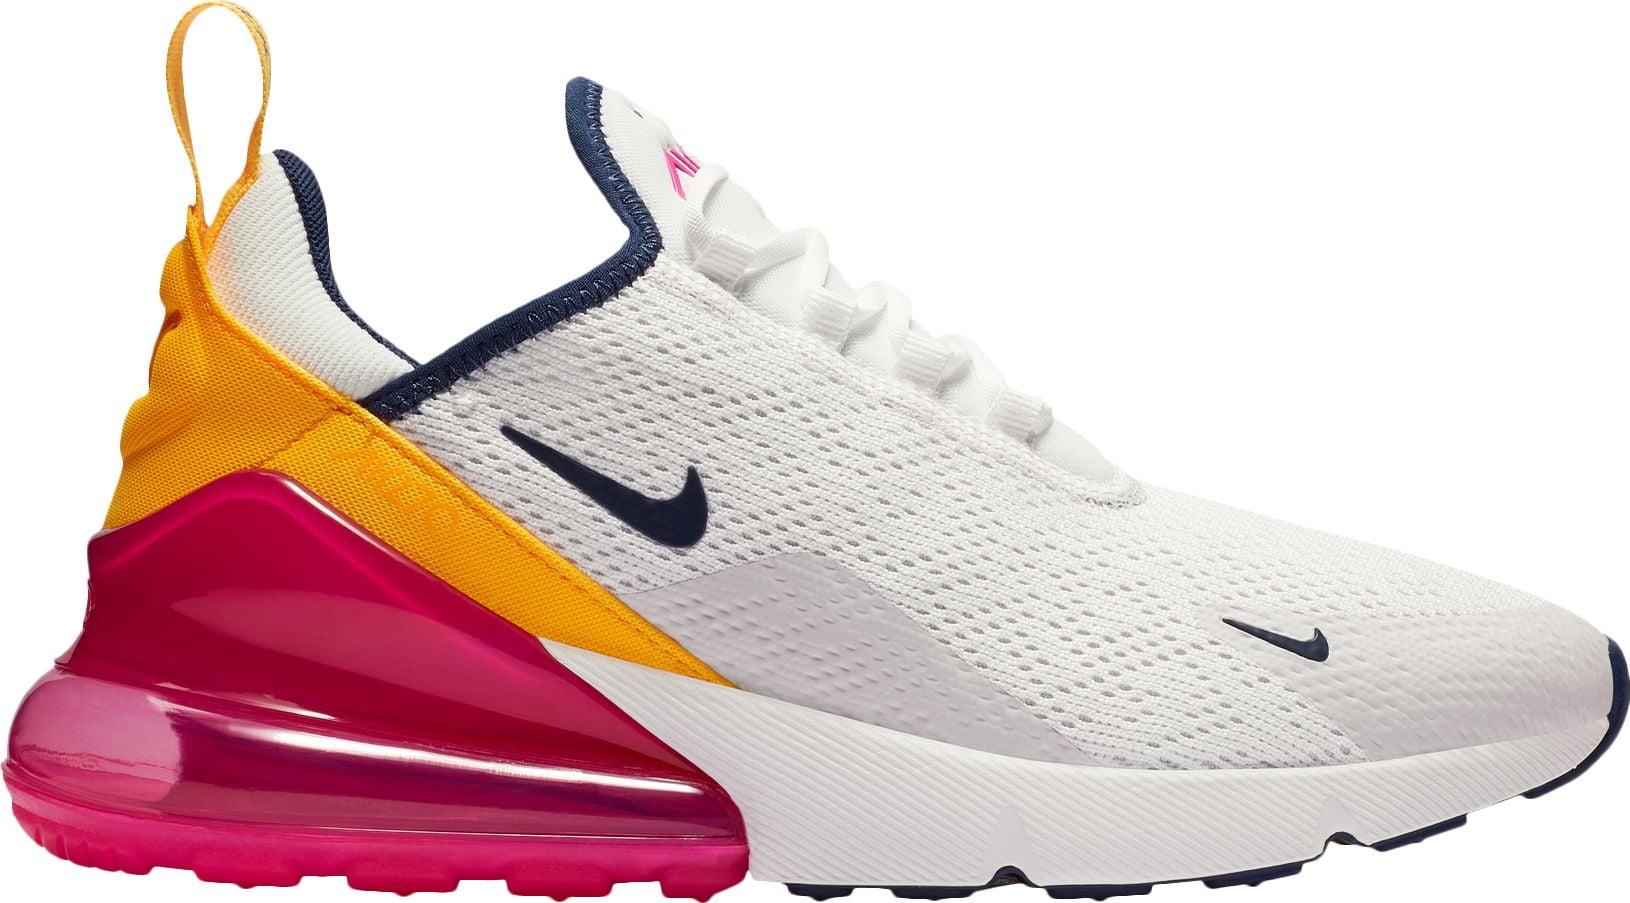 nike women's air max 270 shoes white pink yellow